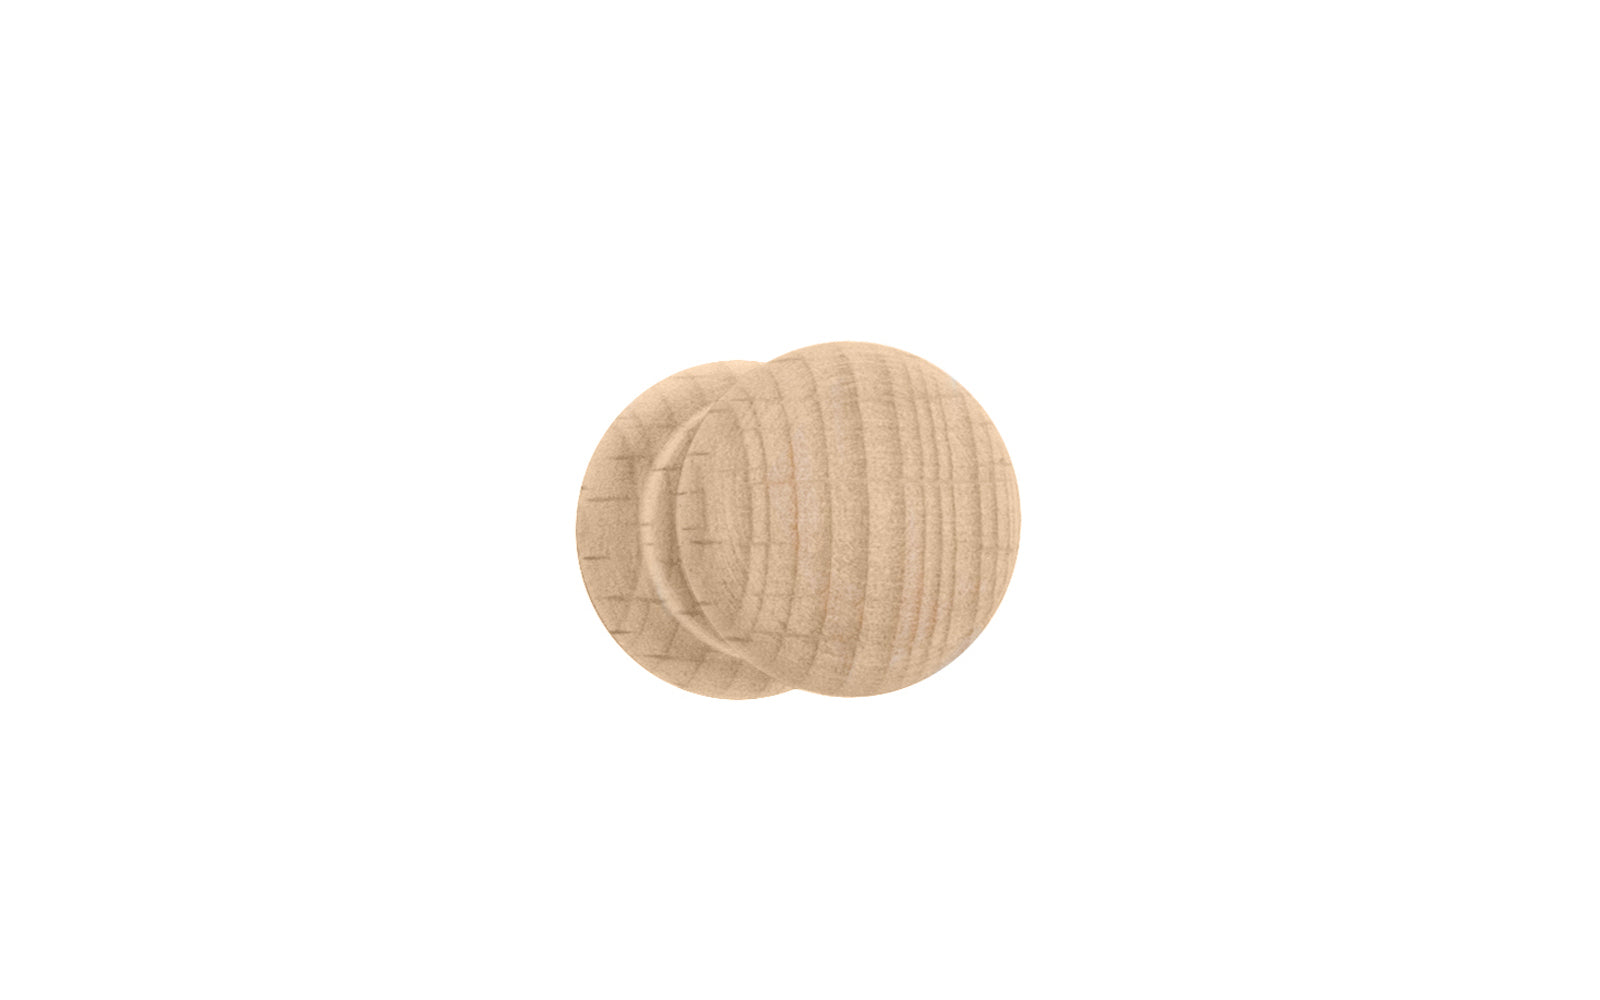 Traditional & Classic Small Shaker Beech Knob with Tenon. Made of unfinished solid beech wood, these wood knobs have a smooth & attractive look & feel. Wooden shaker knob for cabinets, drawers, & furniture. Old style Beechwood Shaker Knob. Wood Shaker Cabinet Knob. 11/16" diameter size knob.